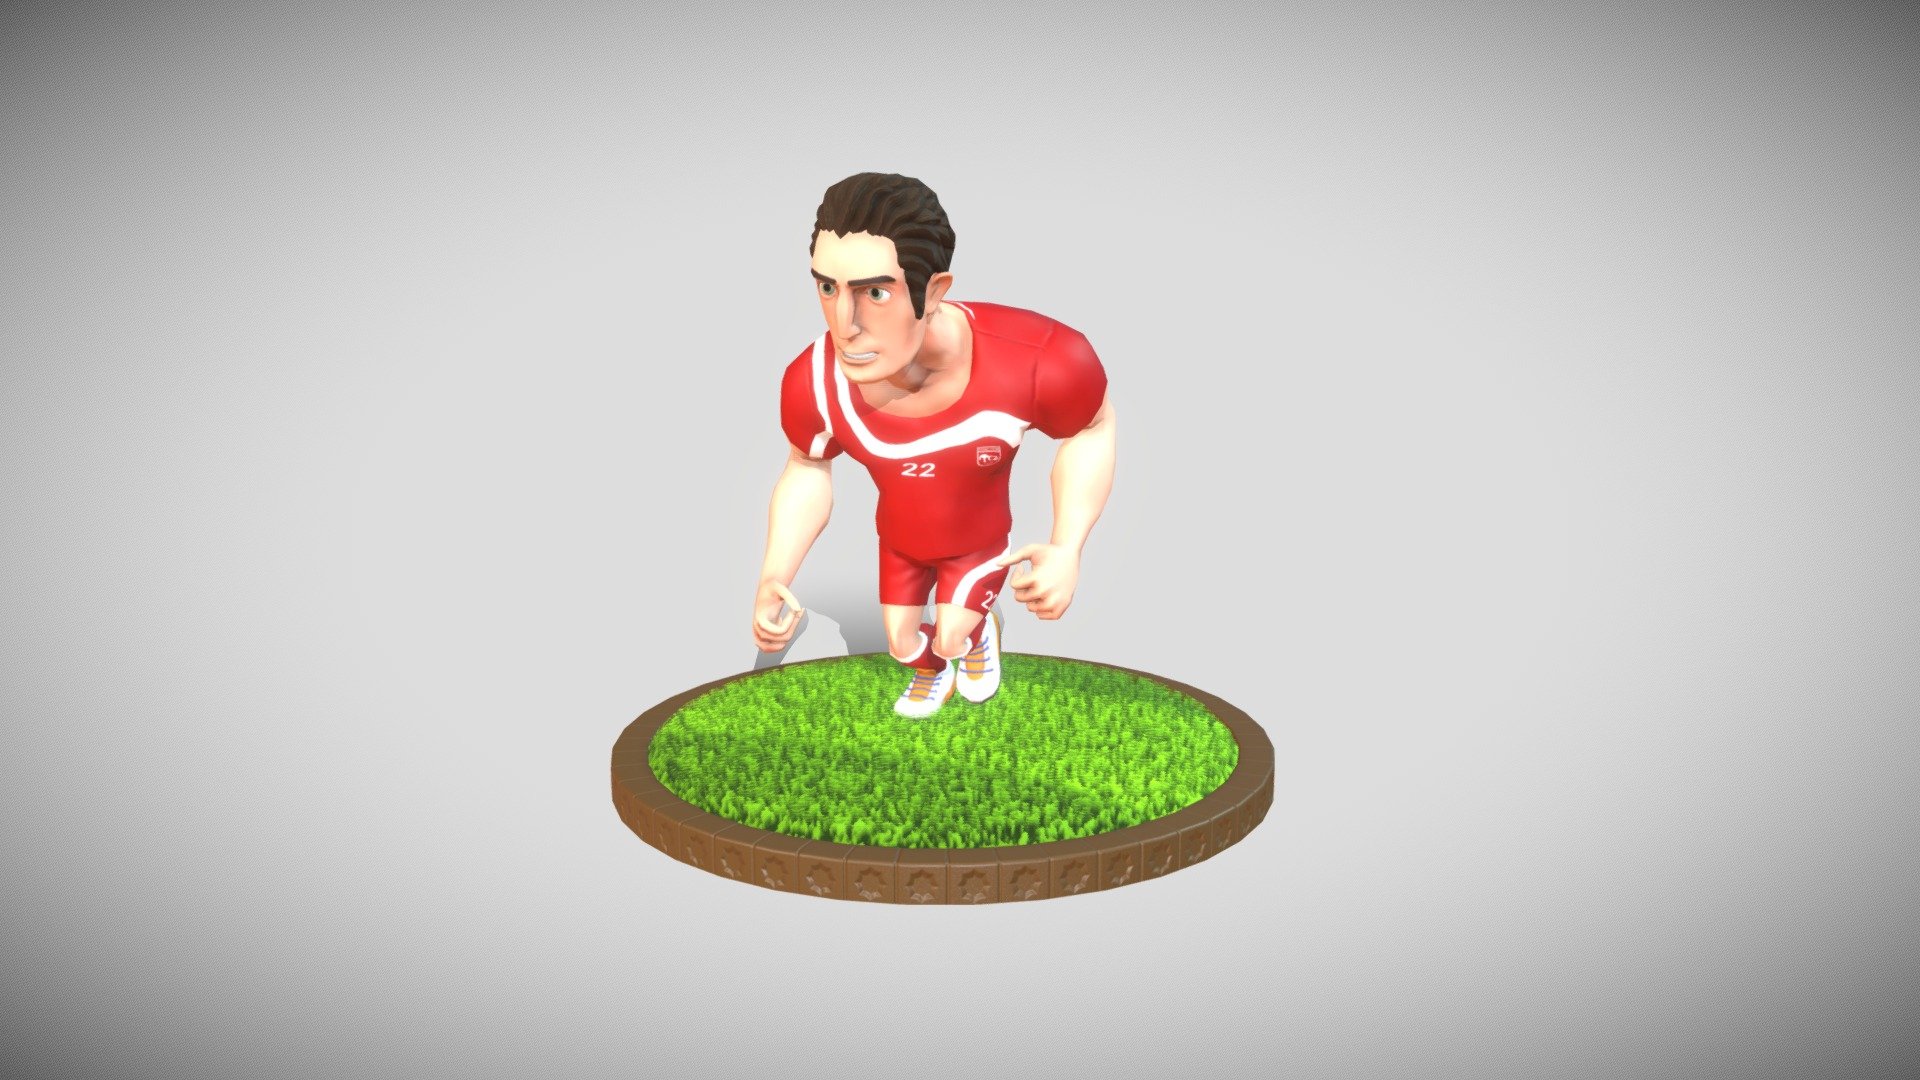 Hi

Modeled this guy for a football themed brawler game for mobile in 2017, unfortunately the project was canceled.

Sculpted in Zbrush, retopoed in Maya and textured in Substance Painter, with a quick Mixamo rig and run animation.

Check out more shots and 1st prototype on my artstation:
https://www.artstation.com/artwork/Po3yeB - Football Player Run - 3D model by Vahid (@svahidm) 3d model